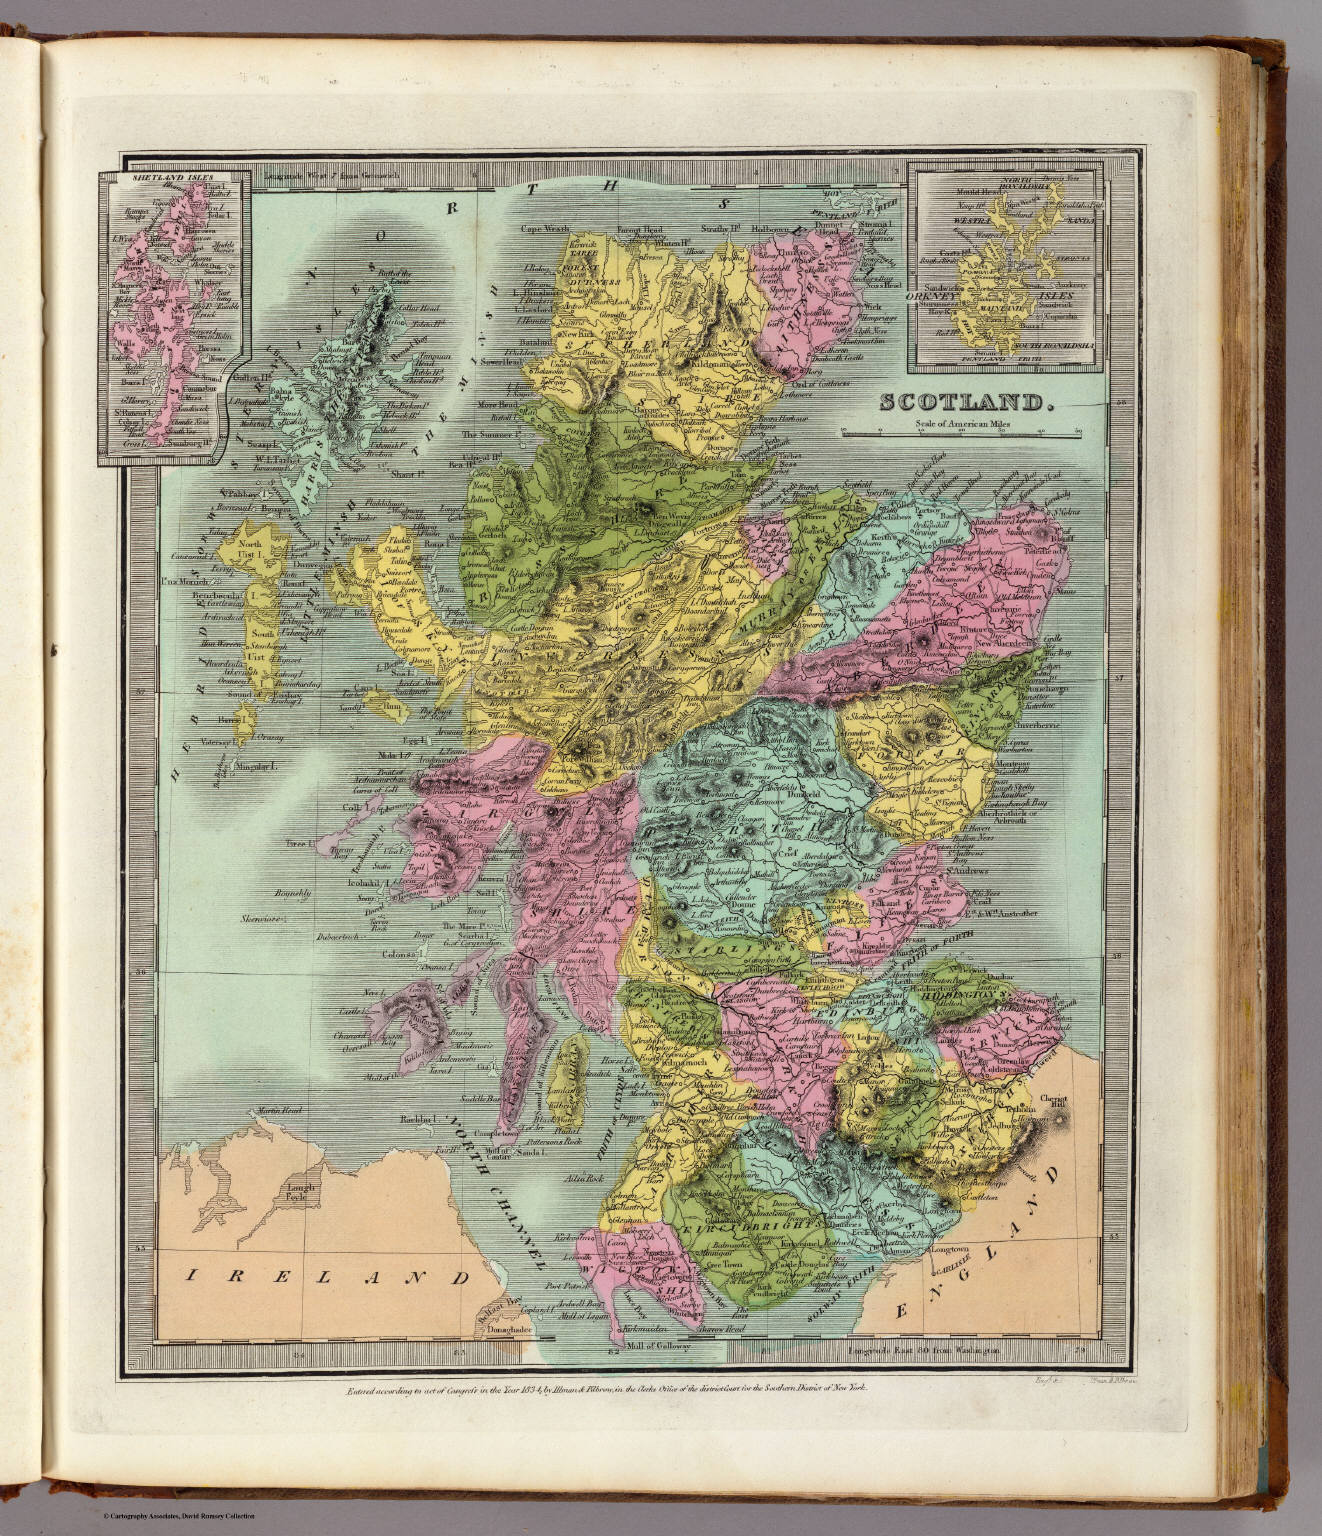 Scotland David Rumsey Historical Map Collection